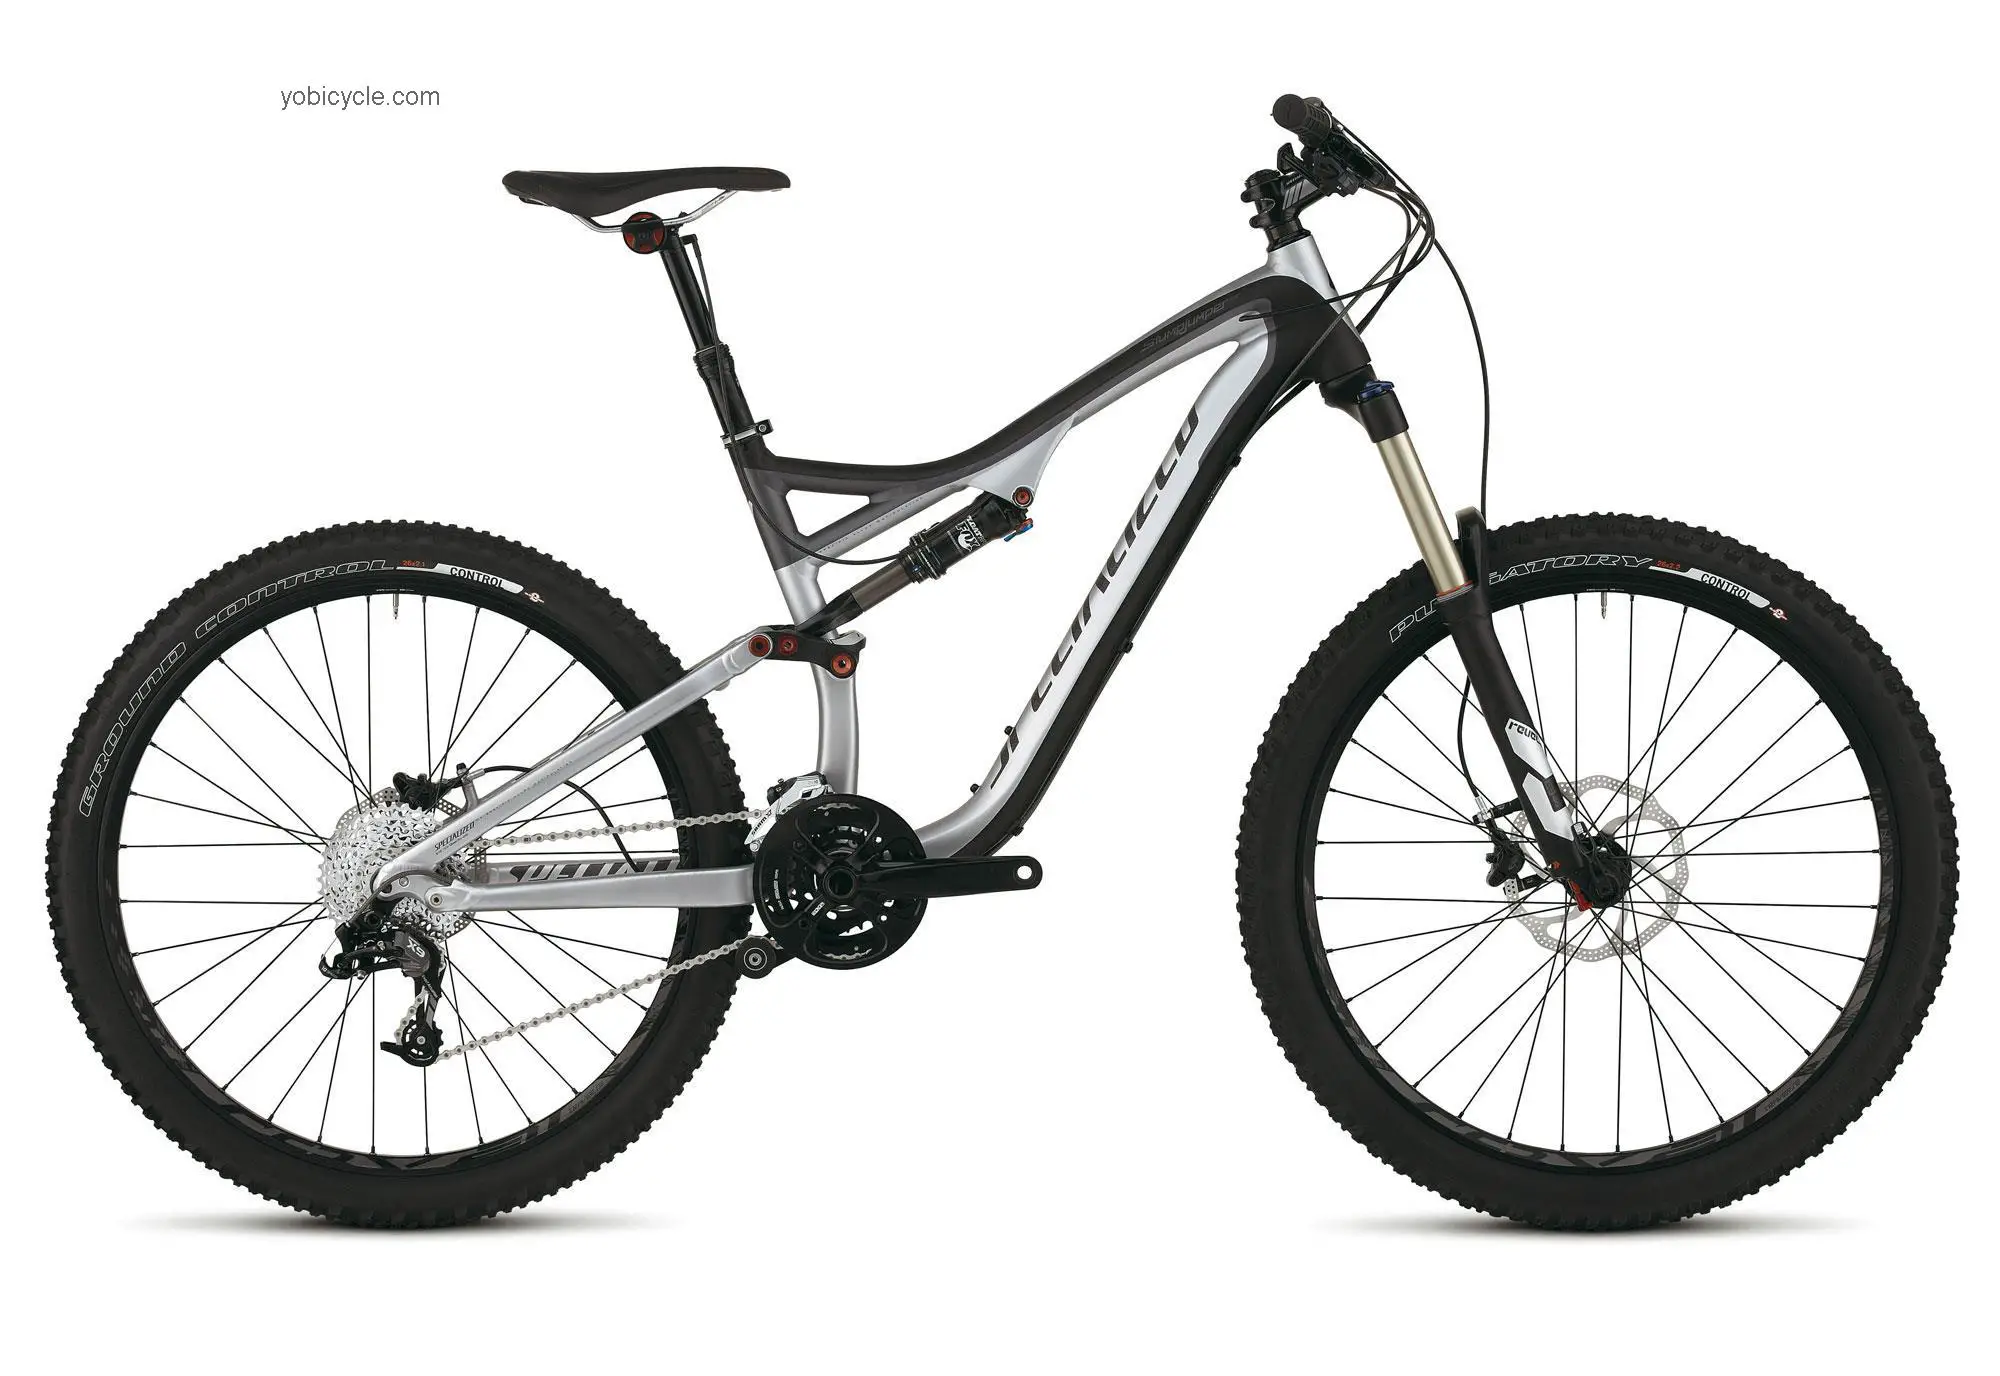 Specialized Stumpjumper FSR Comp Evo competitors and comparison tool online specs and performance